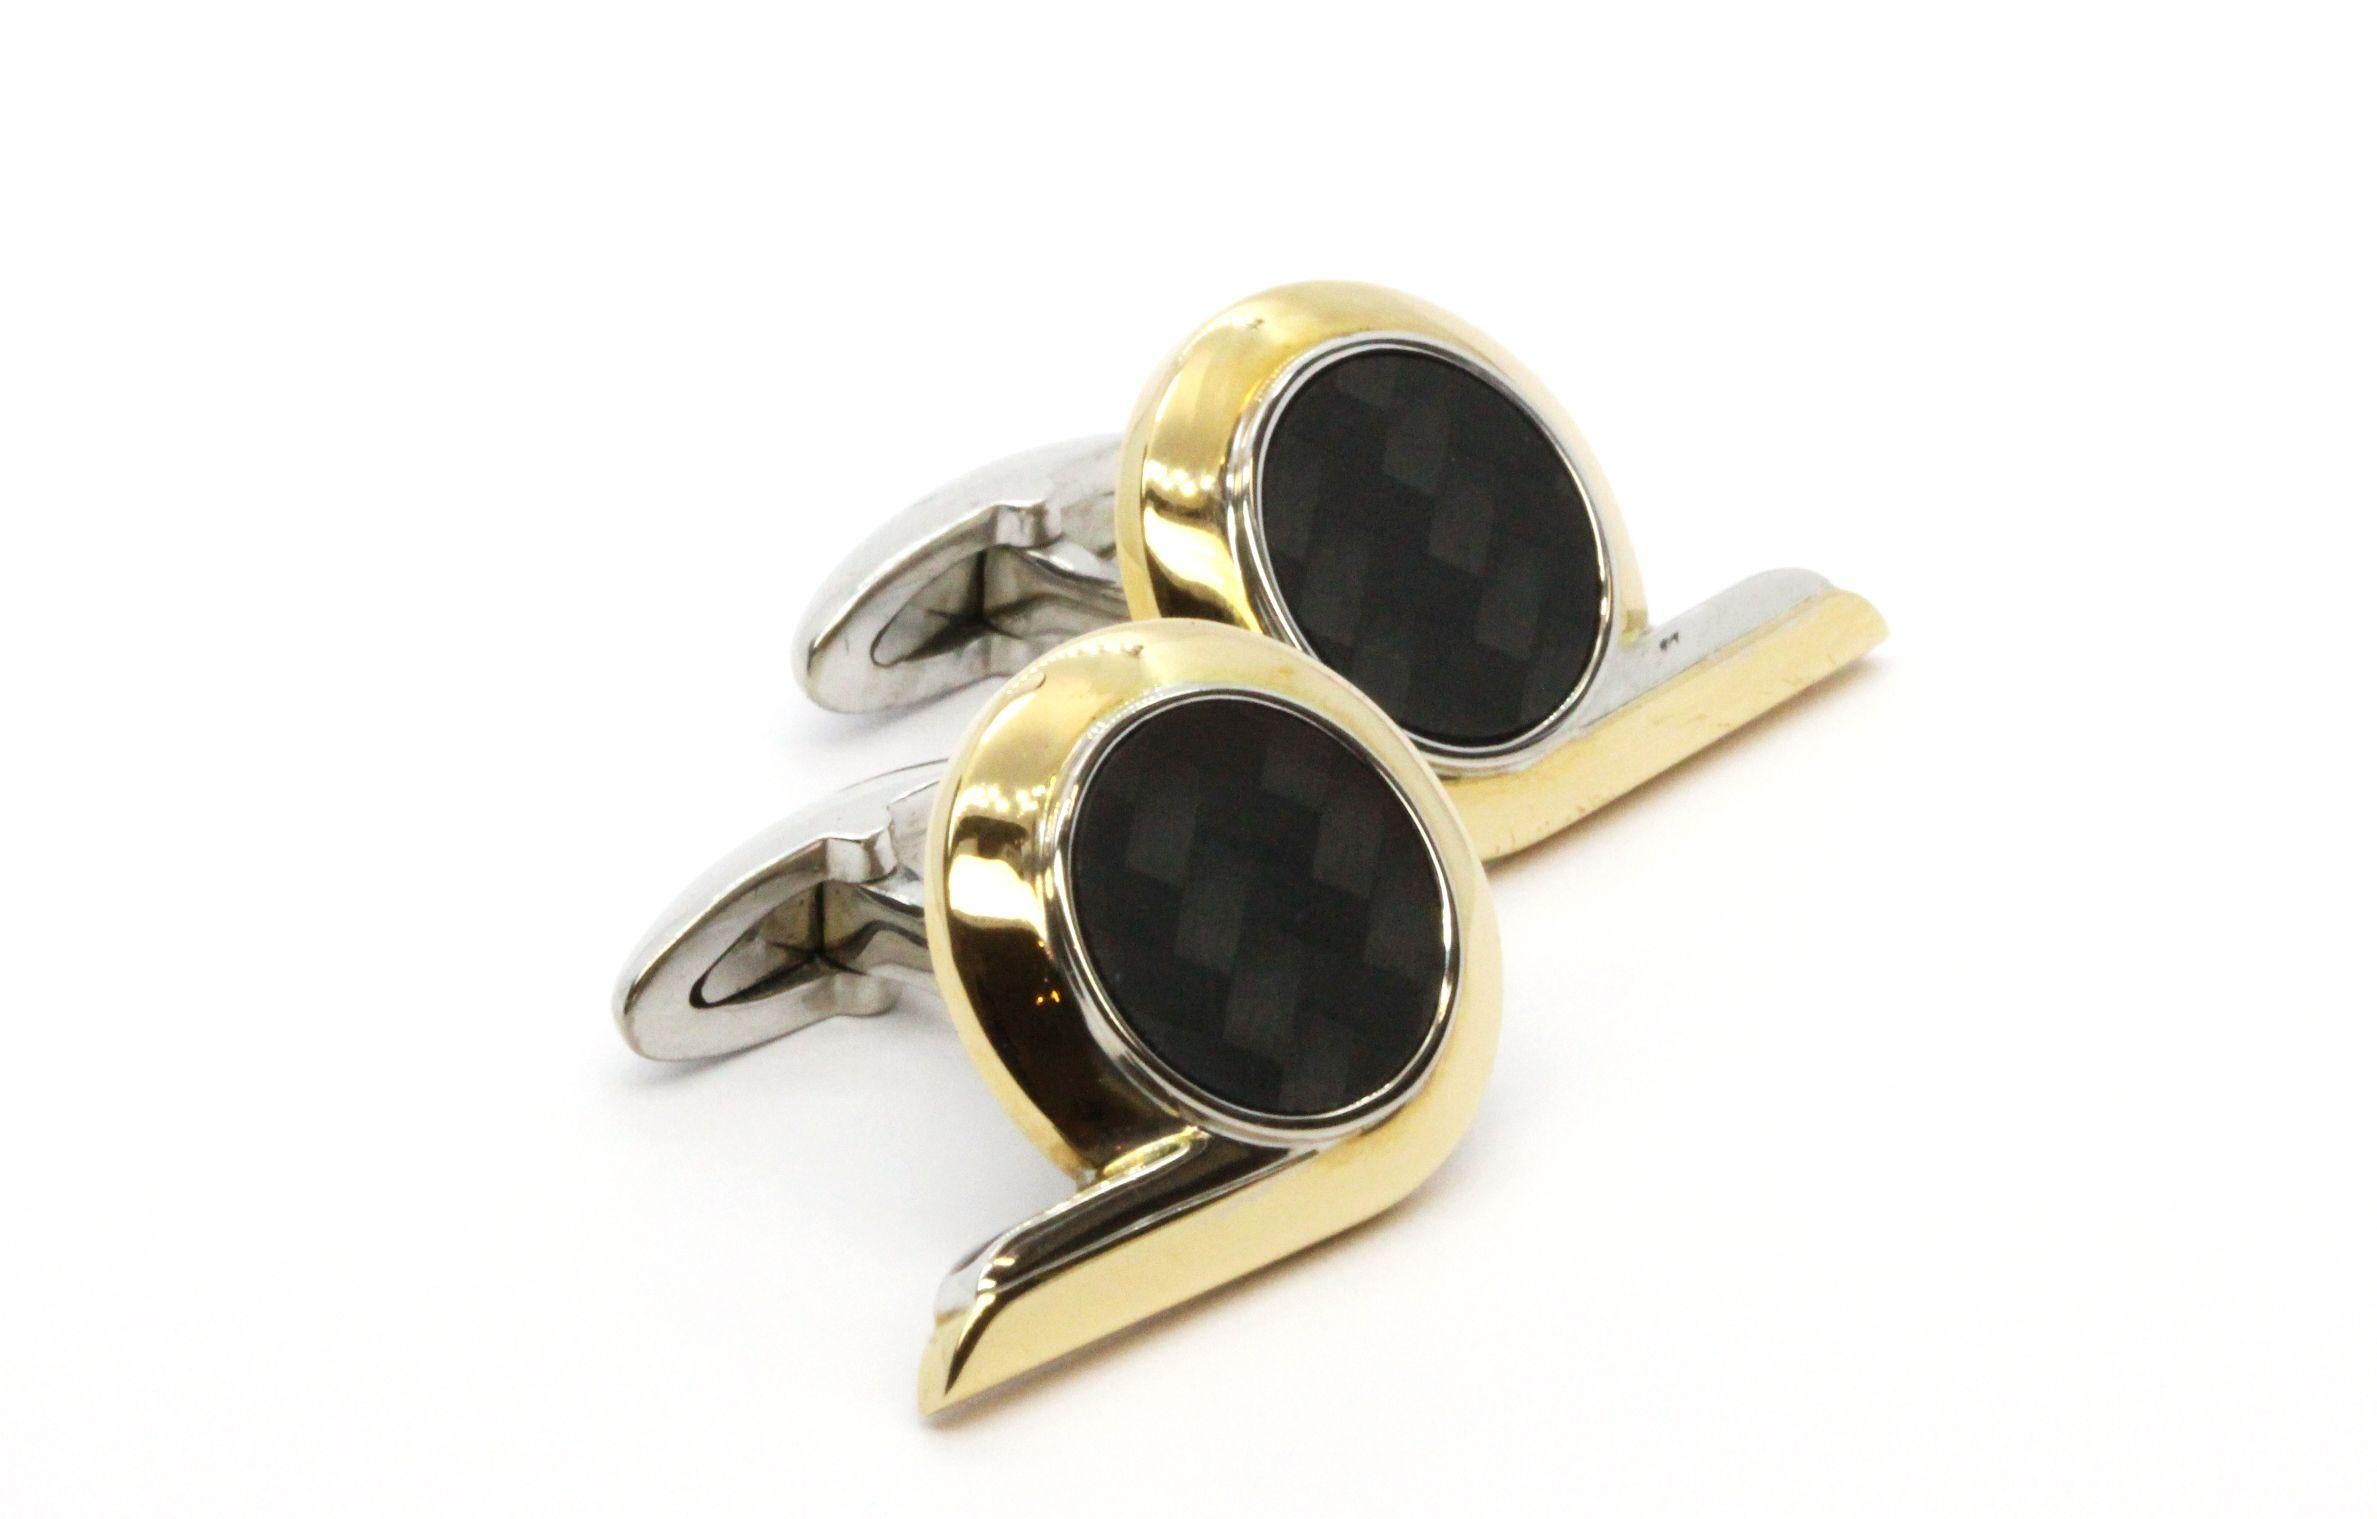 G4774 Pair of 18ct White & Rose Gold Aston Cuff-links with Black Carbon Fibre centres. 

Pair of 18ct White & Rose Gold cufflinks featuring flat disks of black Carbon Fibre centres with a herringbone finish, in full rub over settings , surrounded by